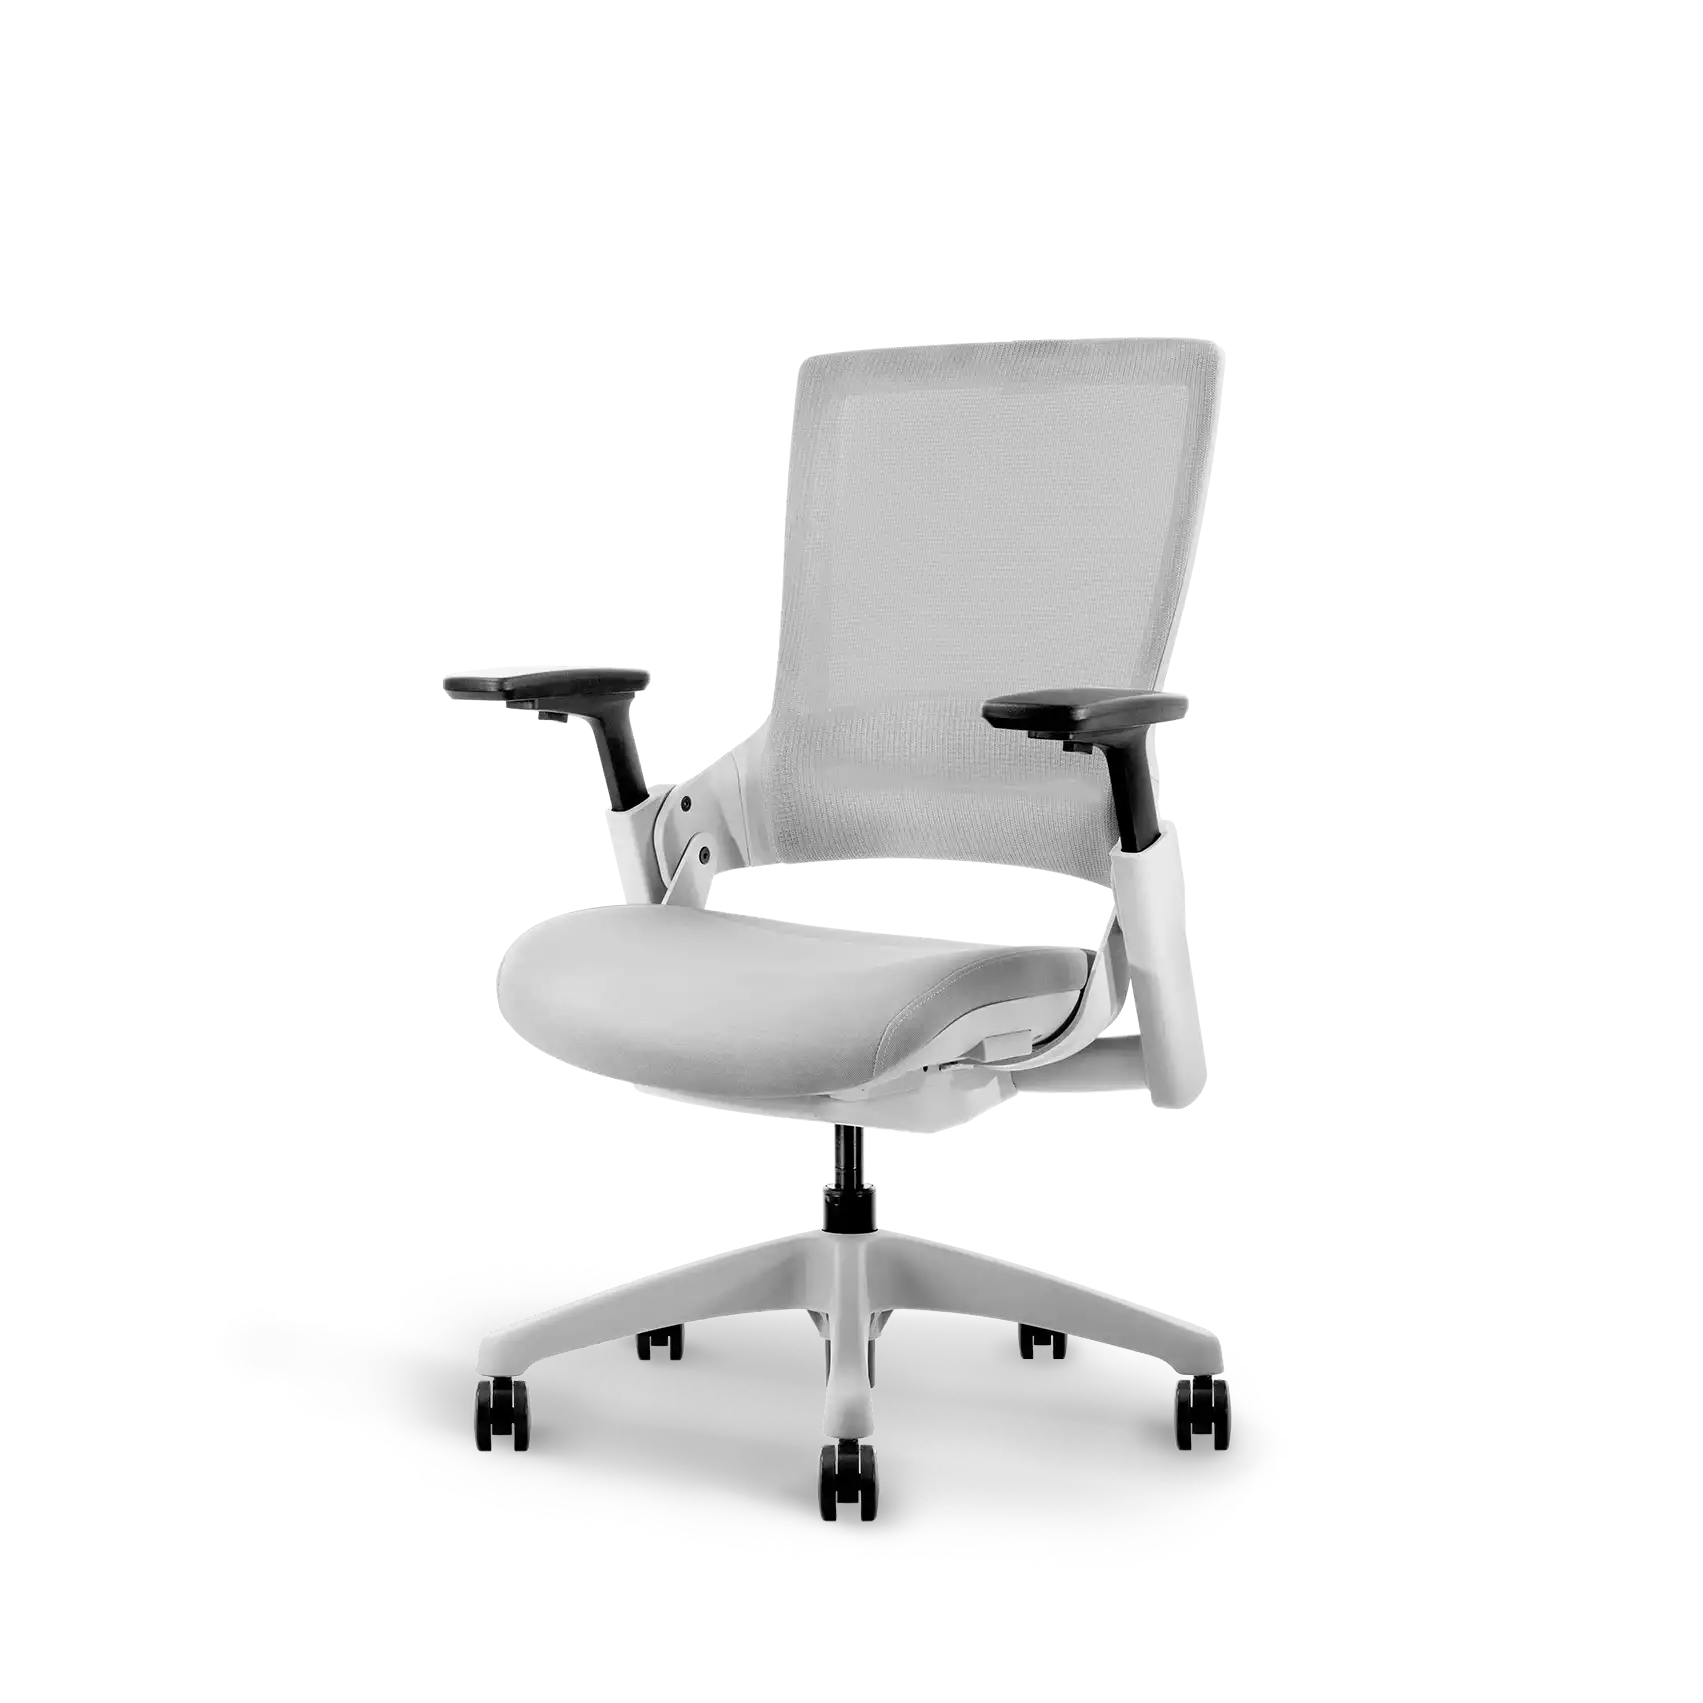 Flujo Angulo ergonomic office chair in grey with adjustable armrests